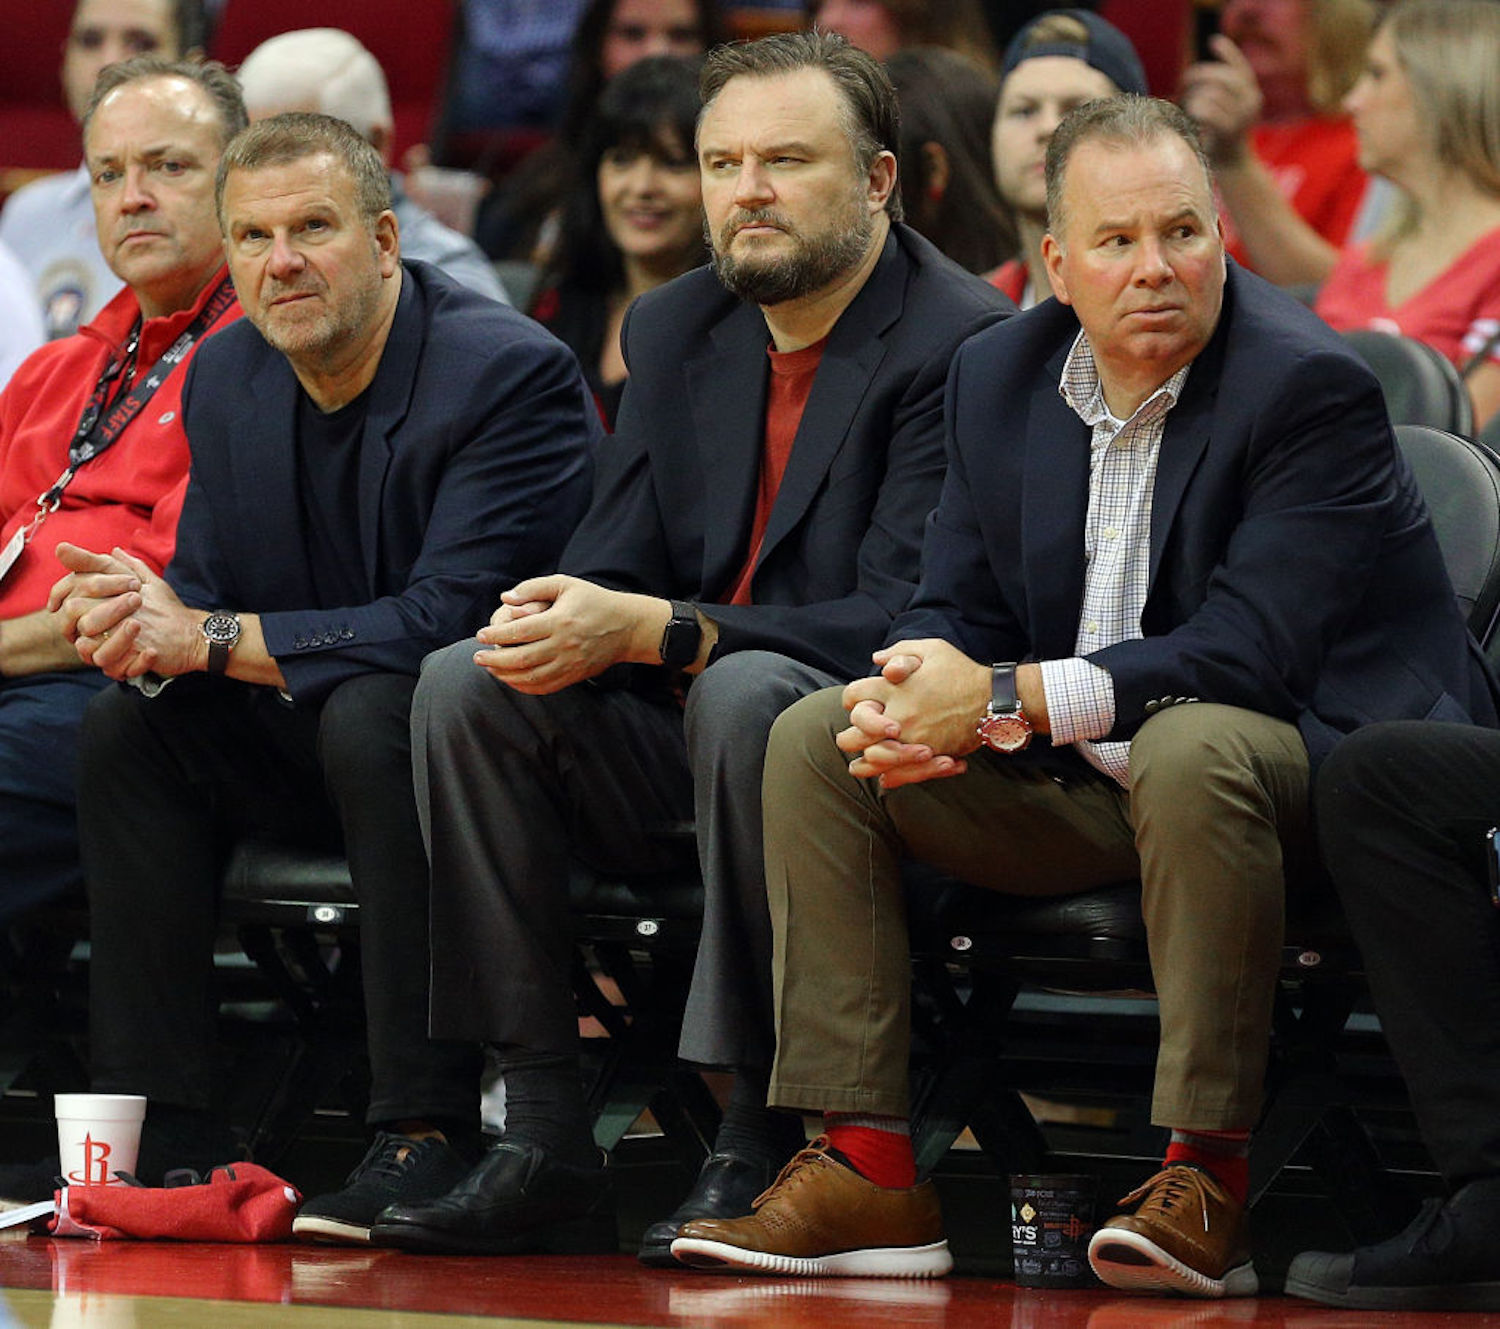 The 76ers finally upgraded their head coach by switching out Brett Brown for Doc Rivers, and they just made another splash by hiring Daryl Morey.